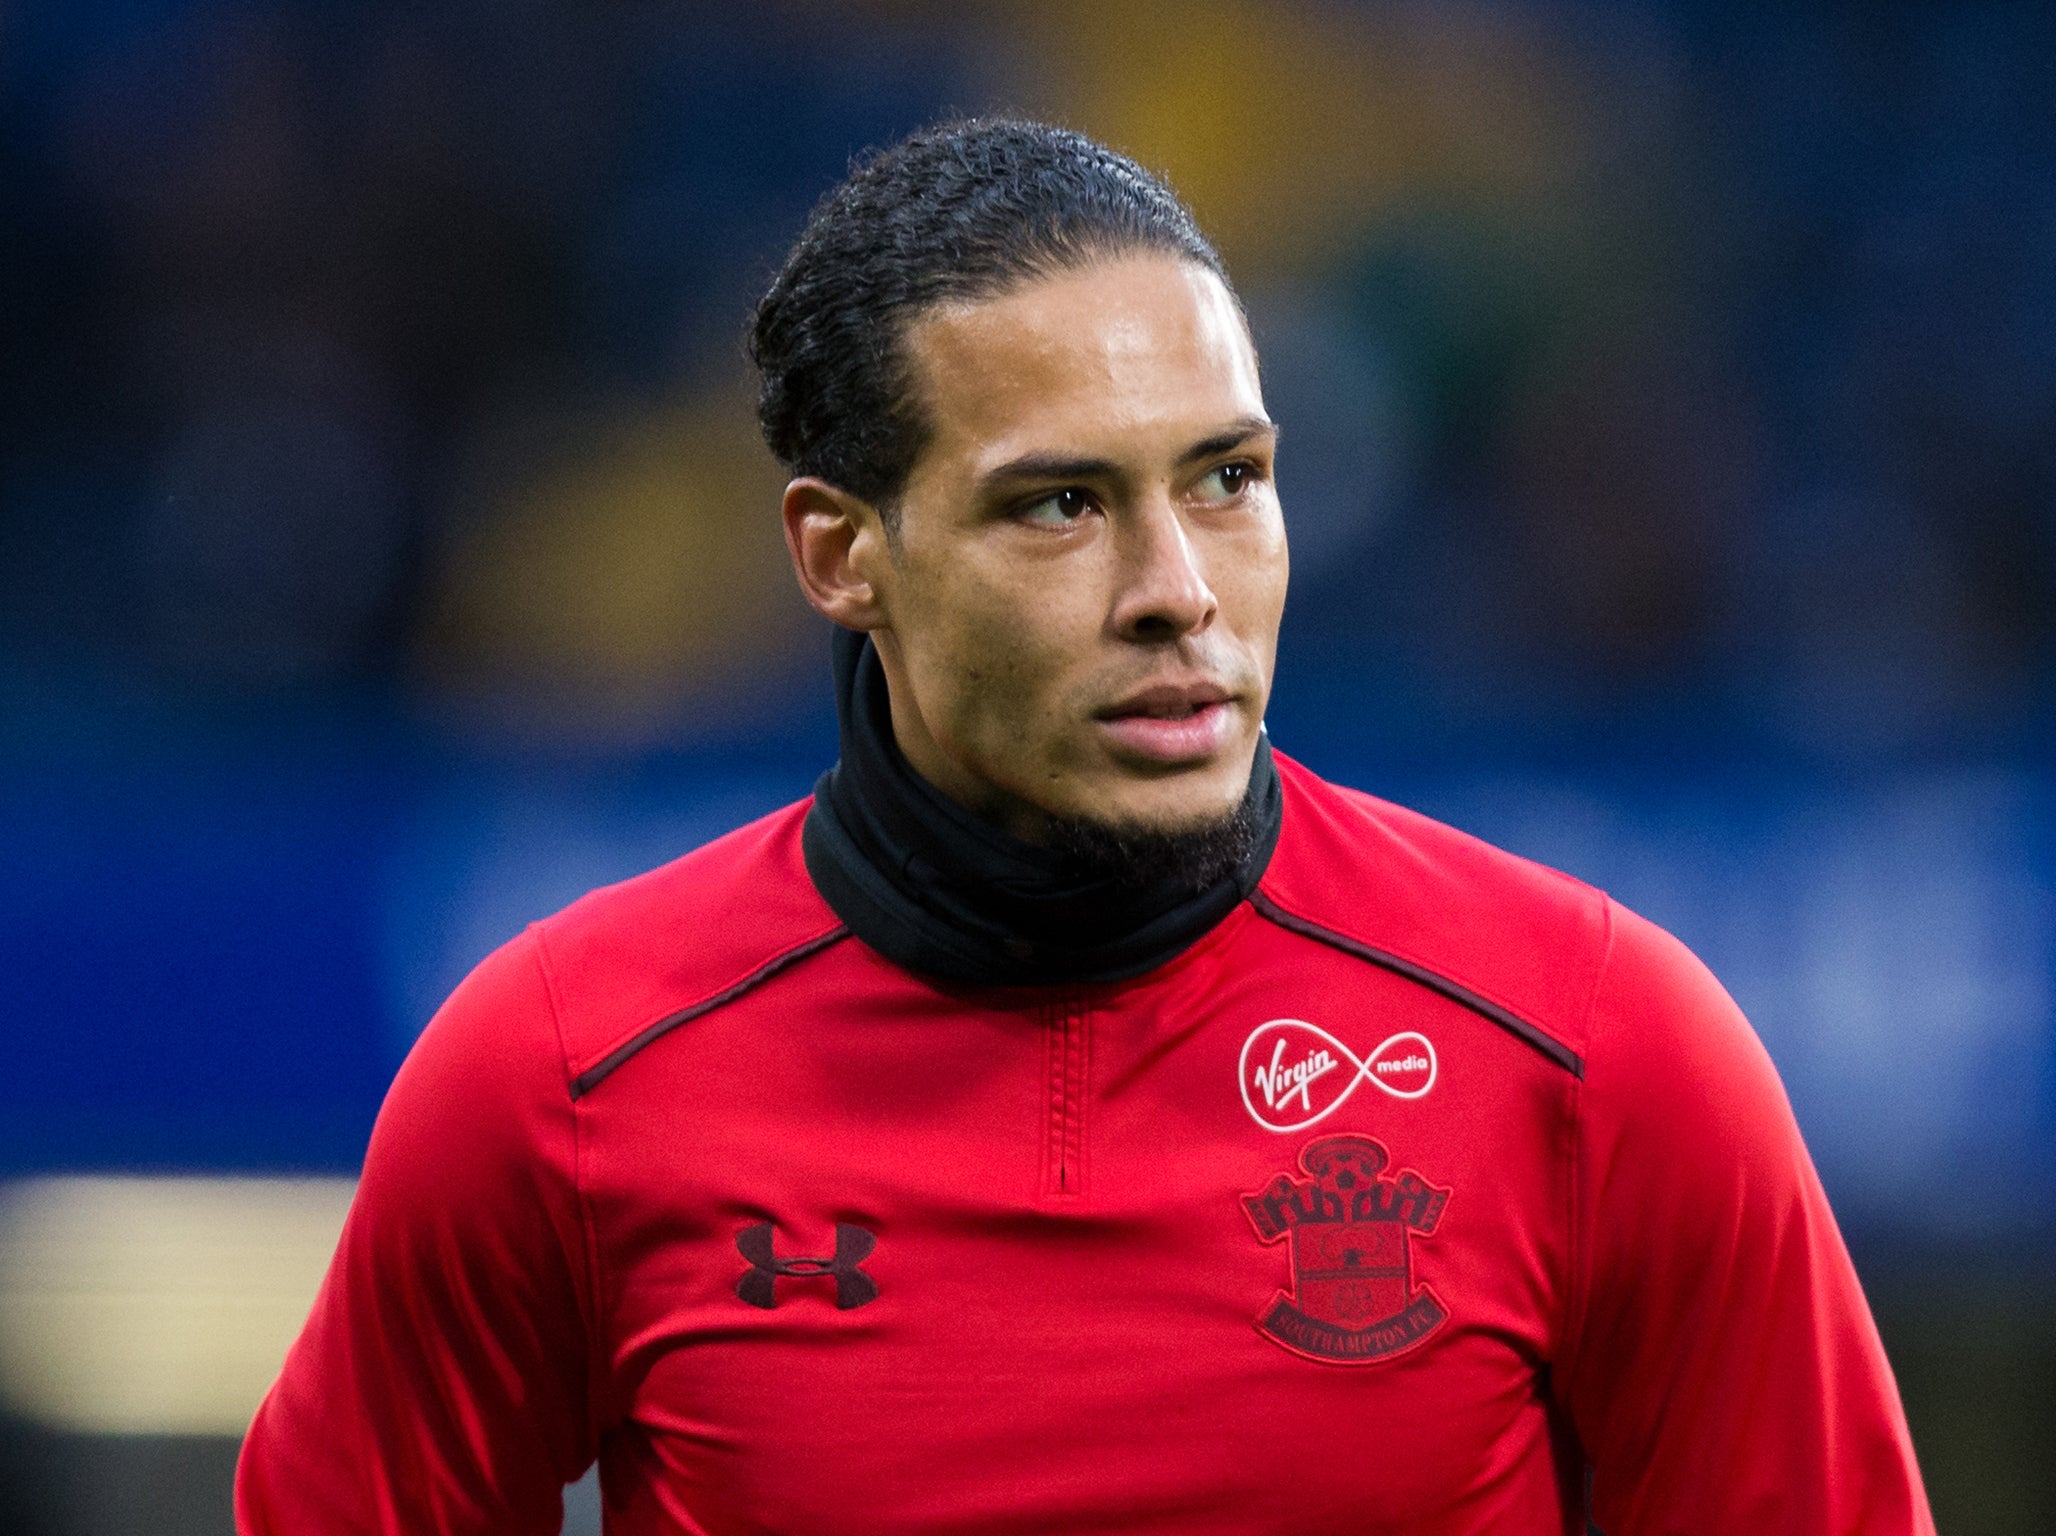 Virgil van Dijk will move to Anfield for a world record fee